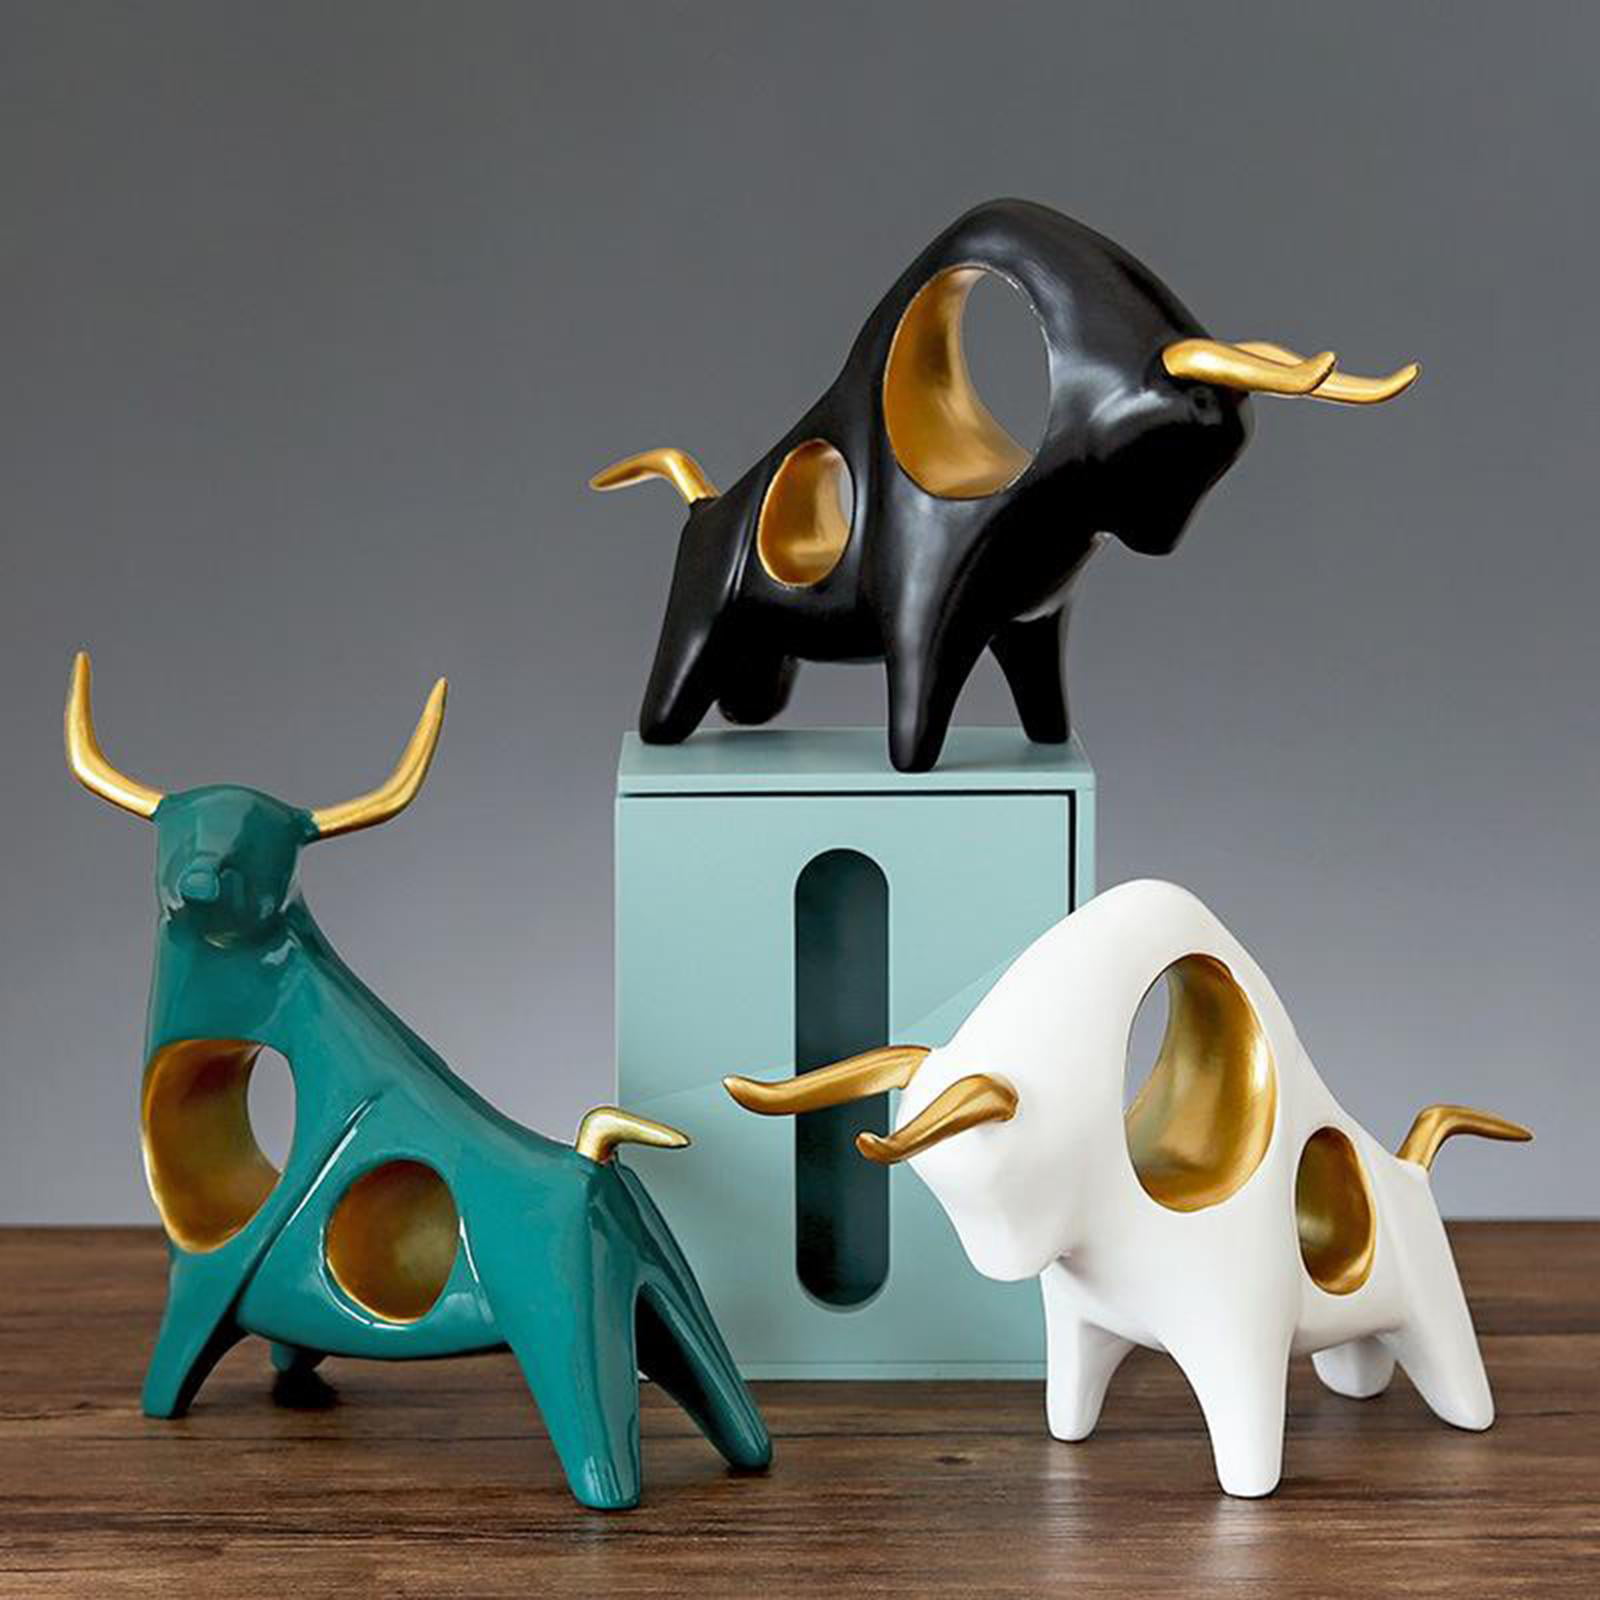 Table and Desktop Office Baoblaze Resin Sculpture Accent Piece B Black Modern Ox Bull Shaped Decorative Object for Home